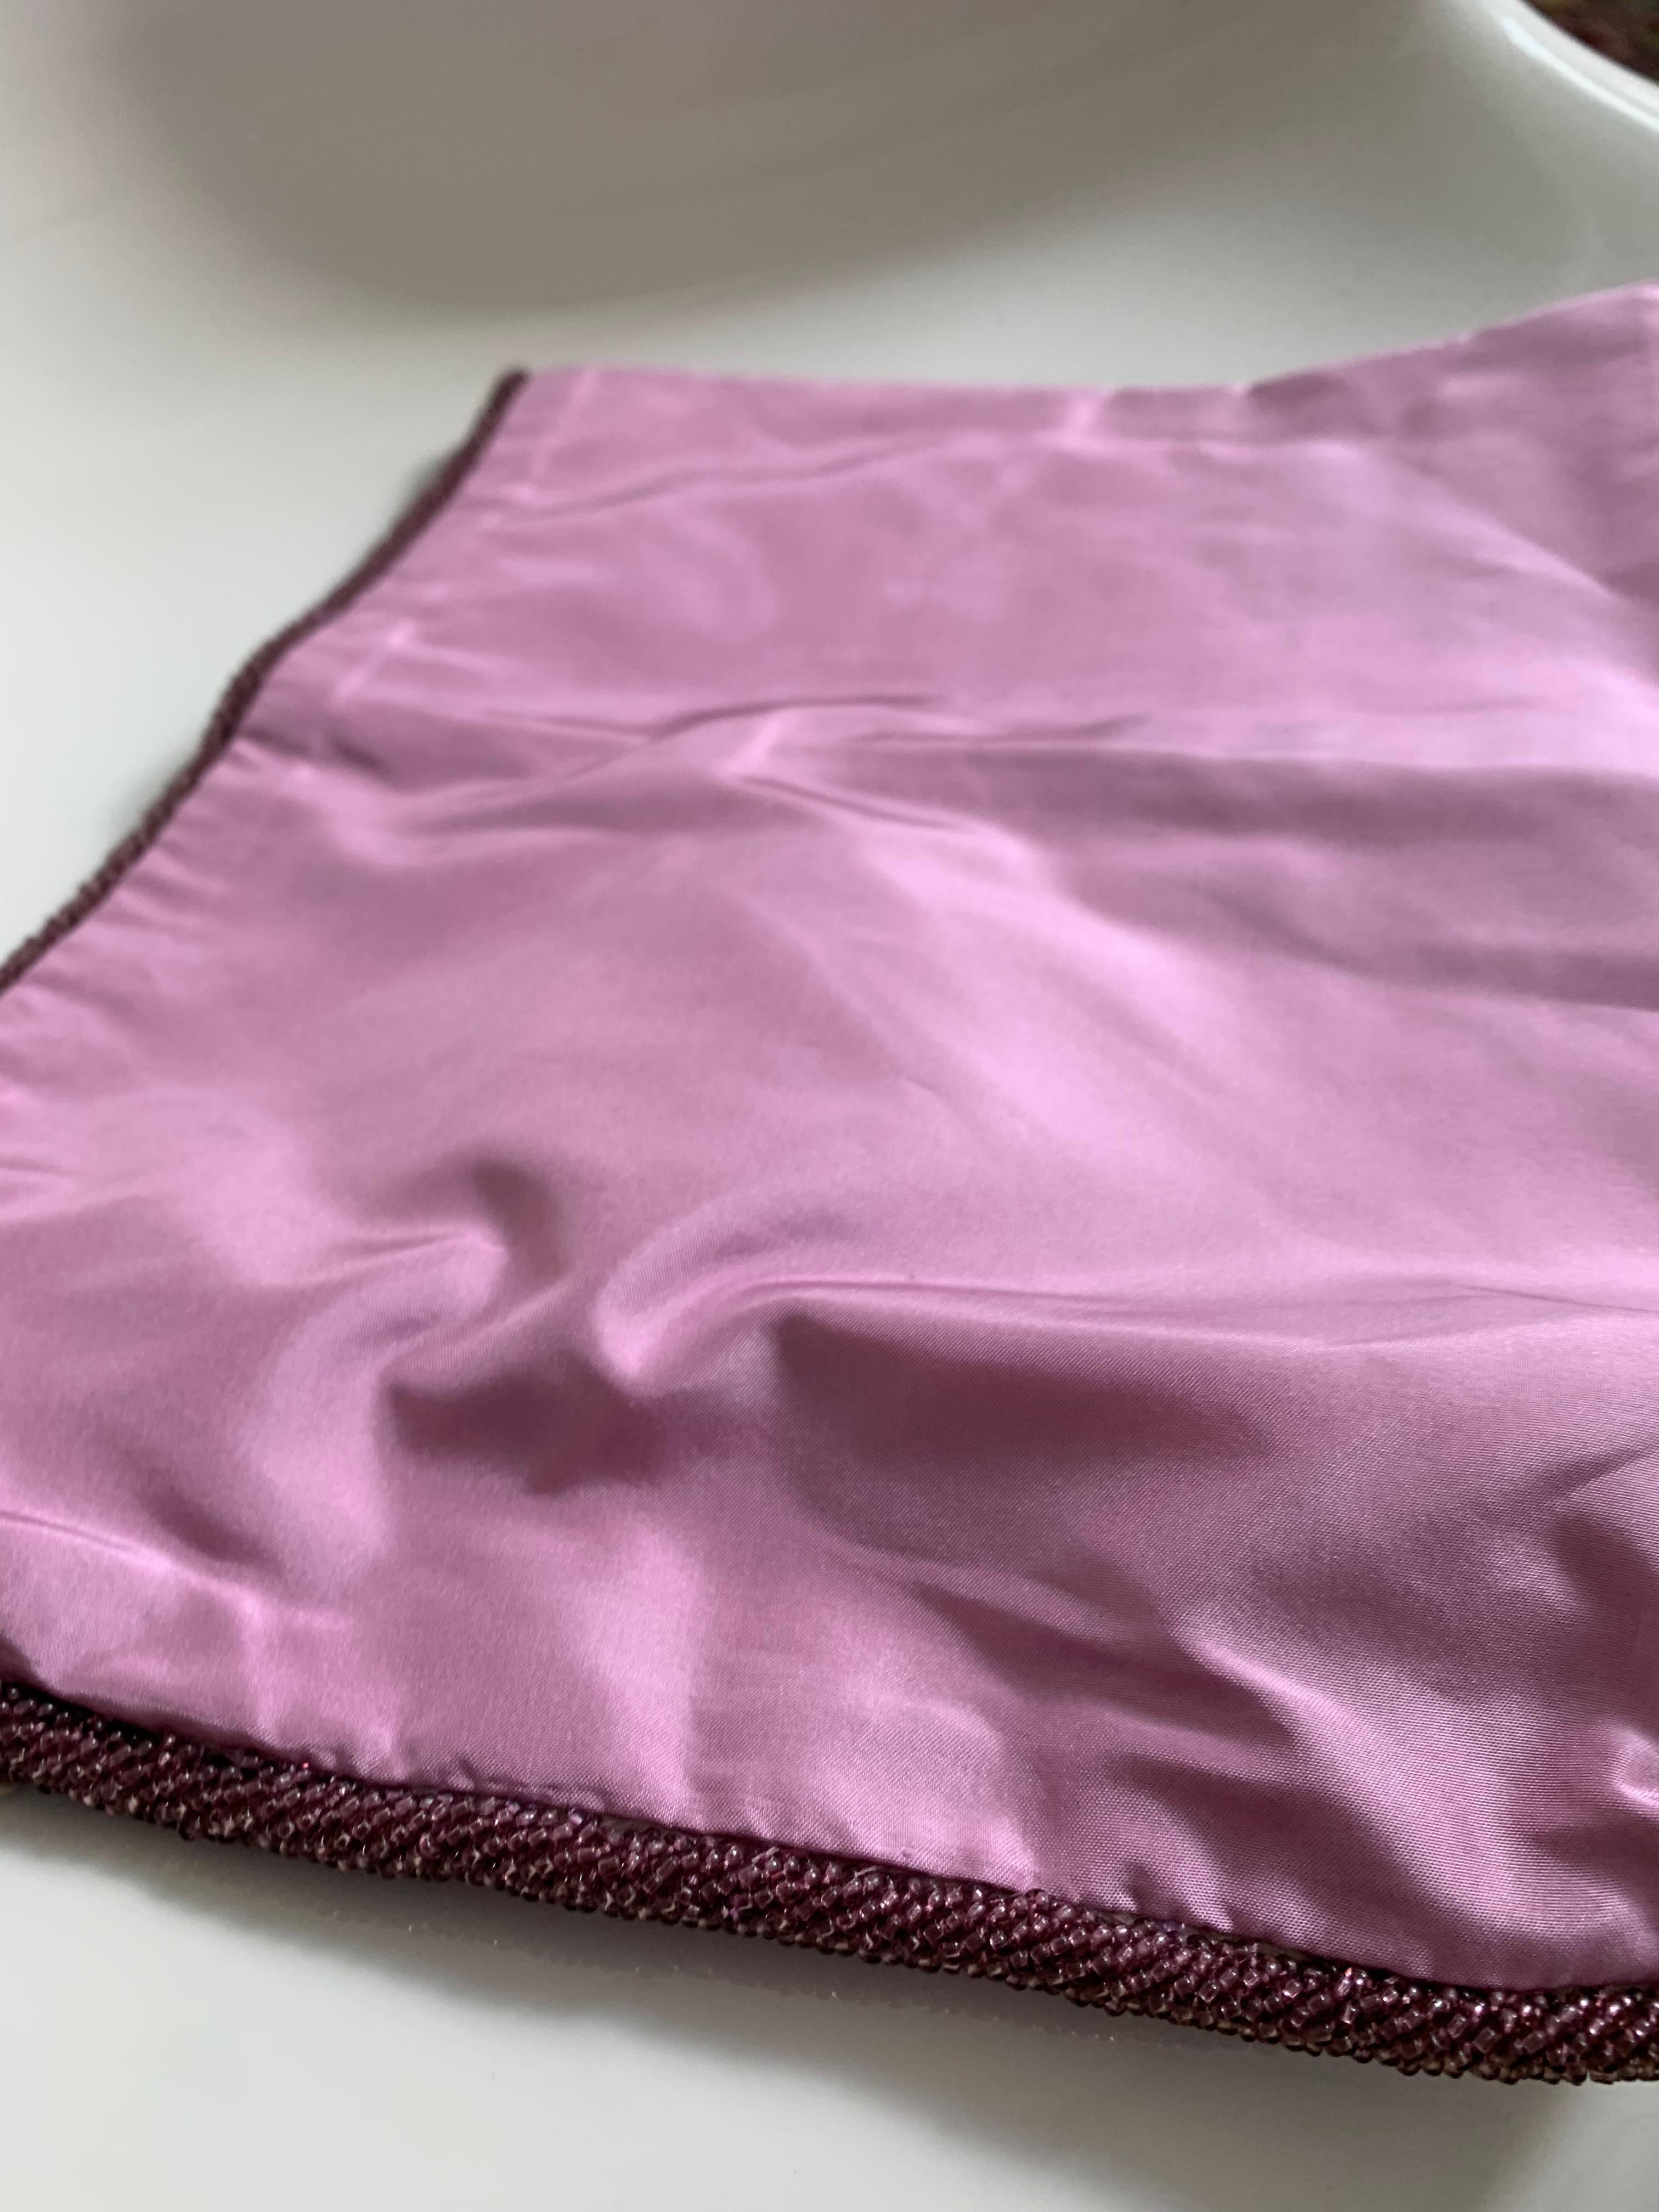 Hyacinth pink silk square pillow sham, pink crystal beaded flange, zip. Measures: 18 x 18 inch.